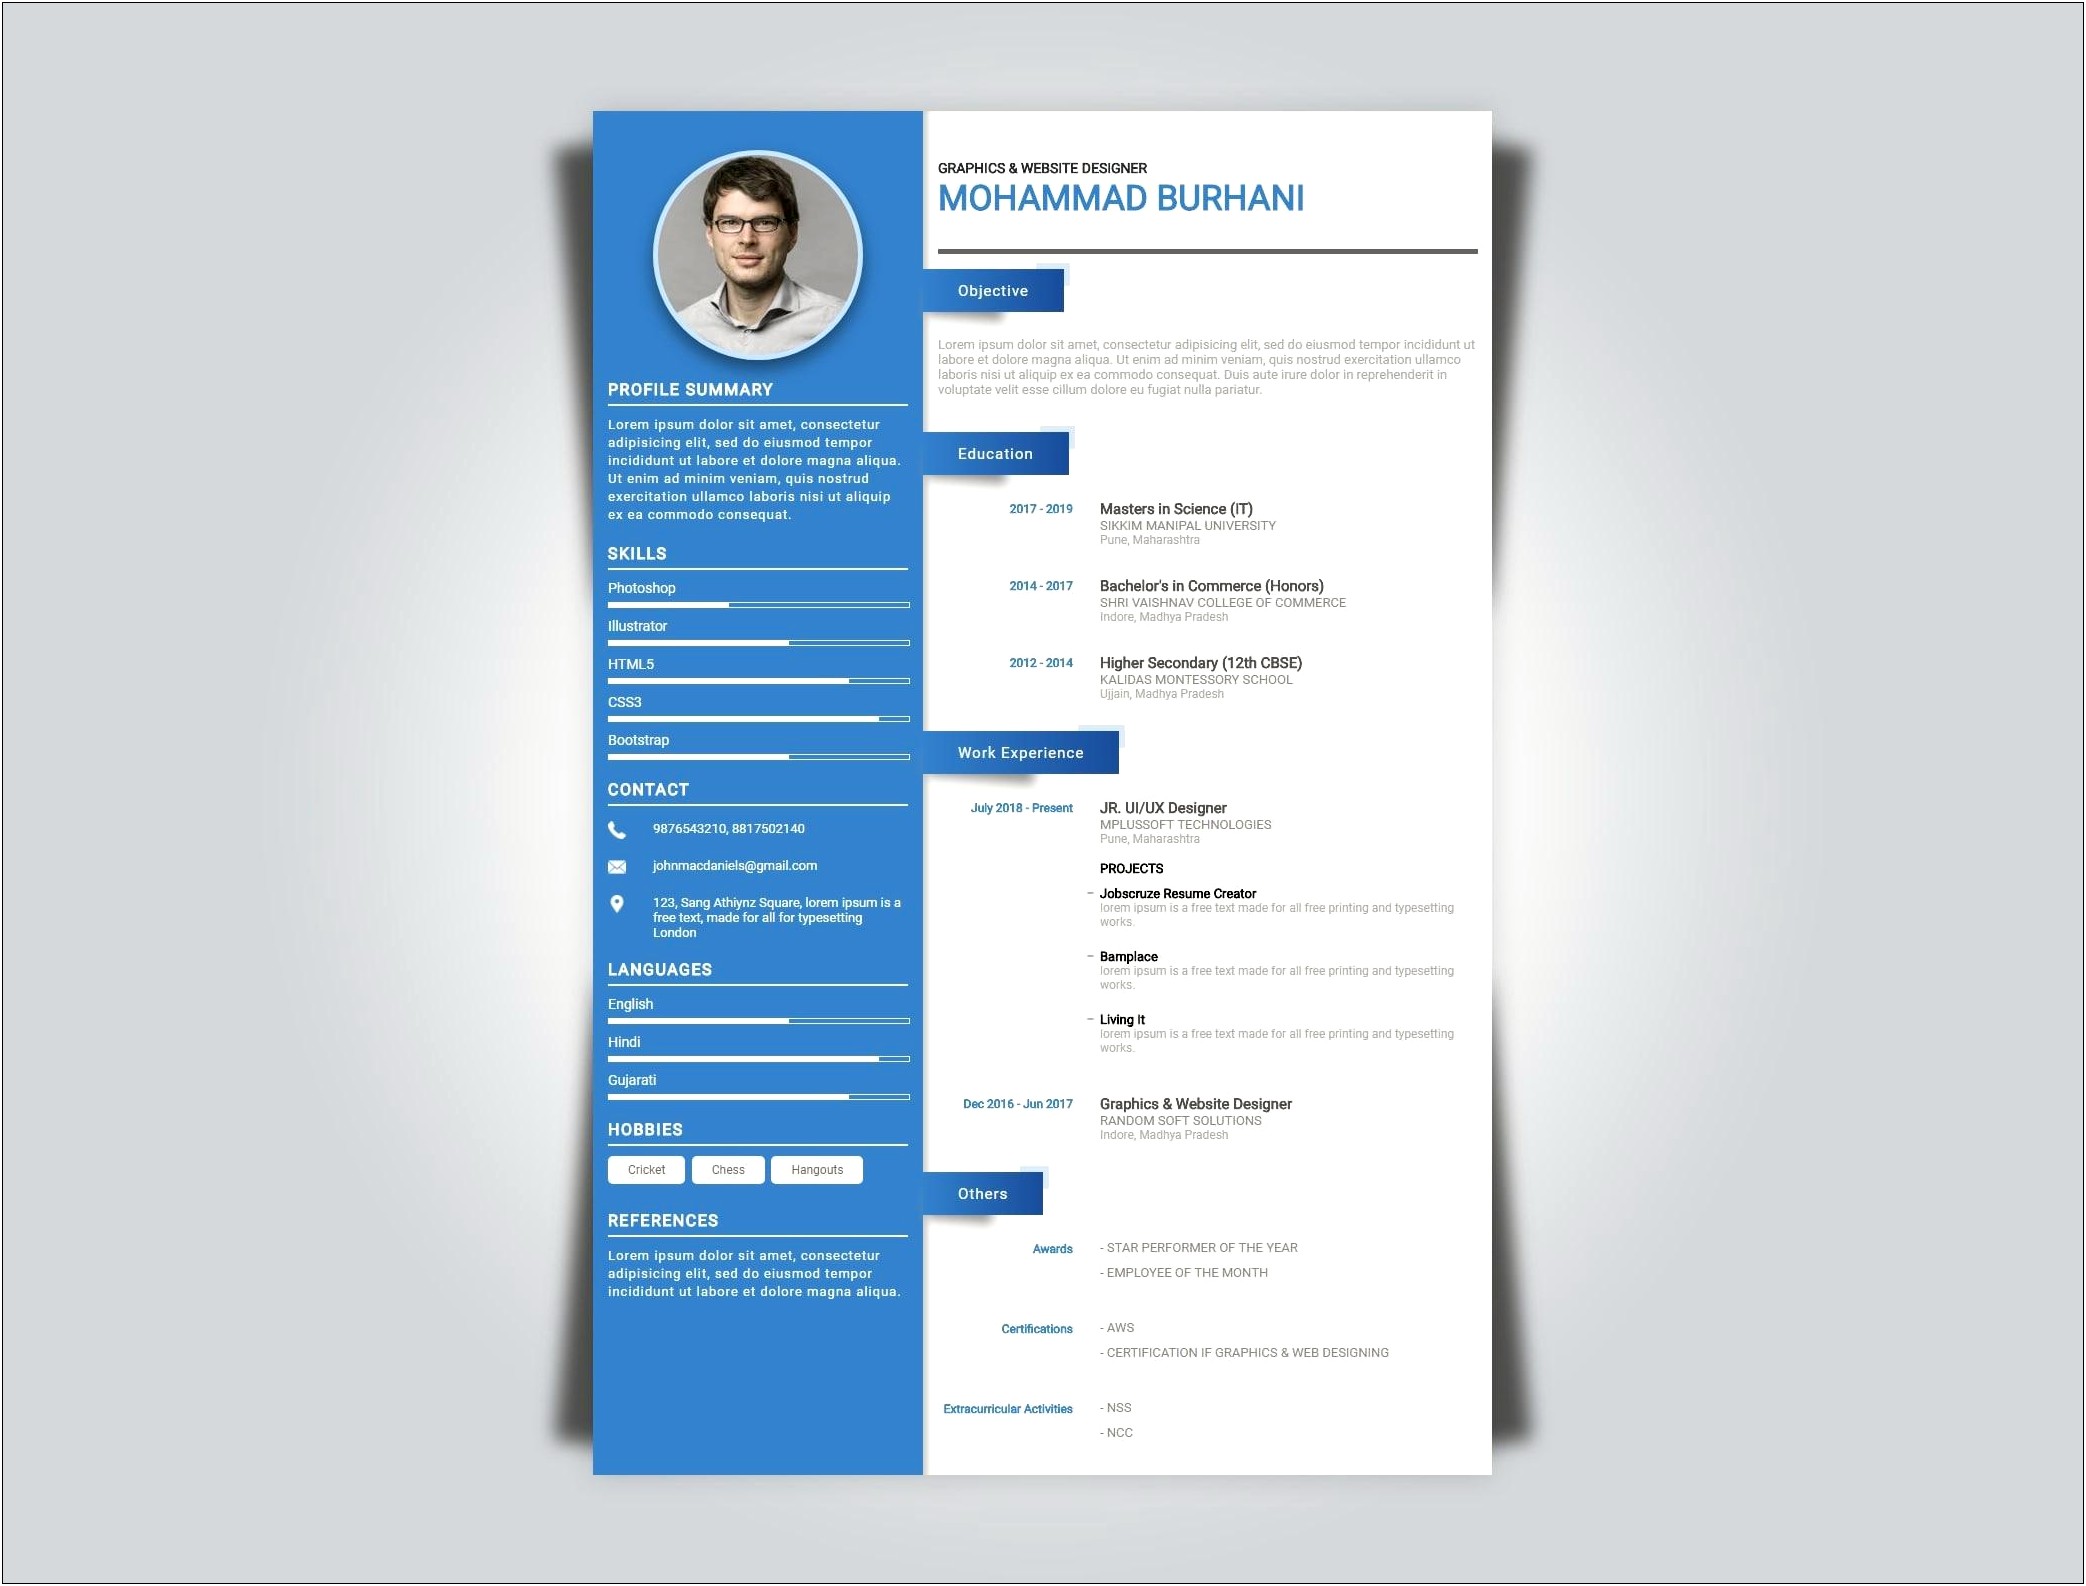 Is An Objective Needed On A Resume 2017